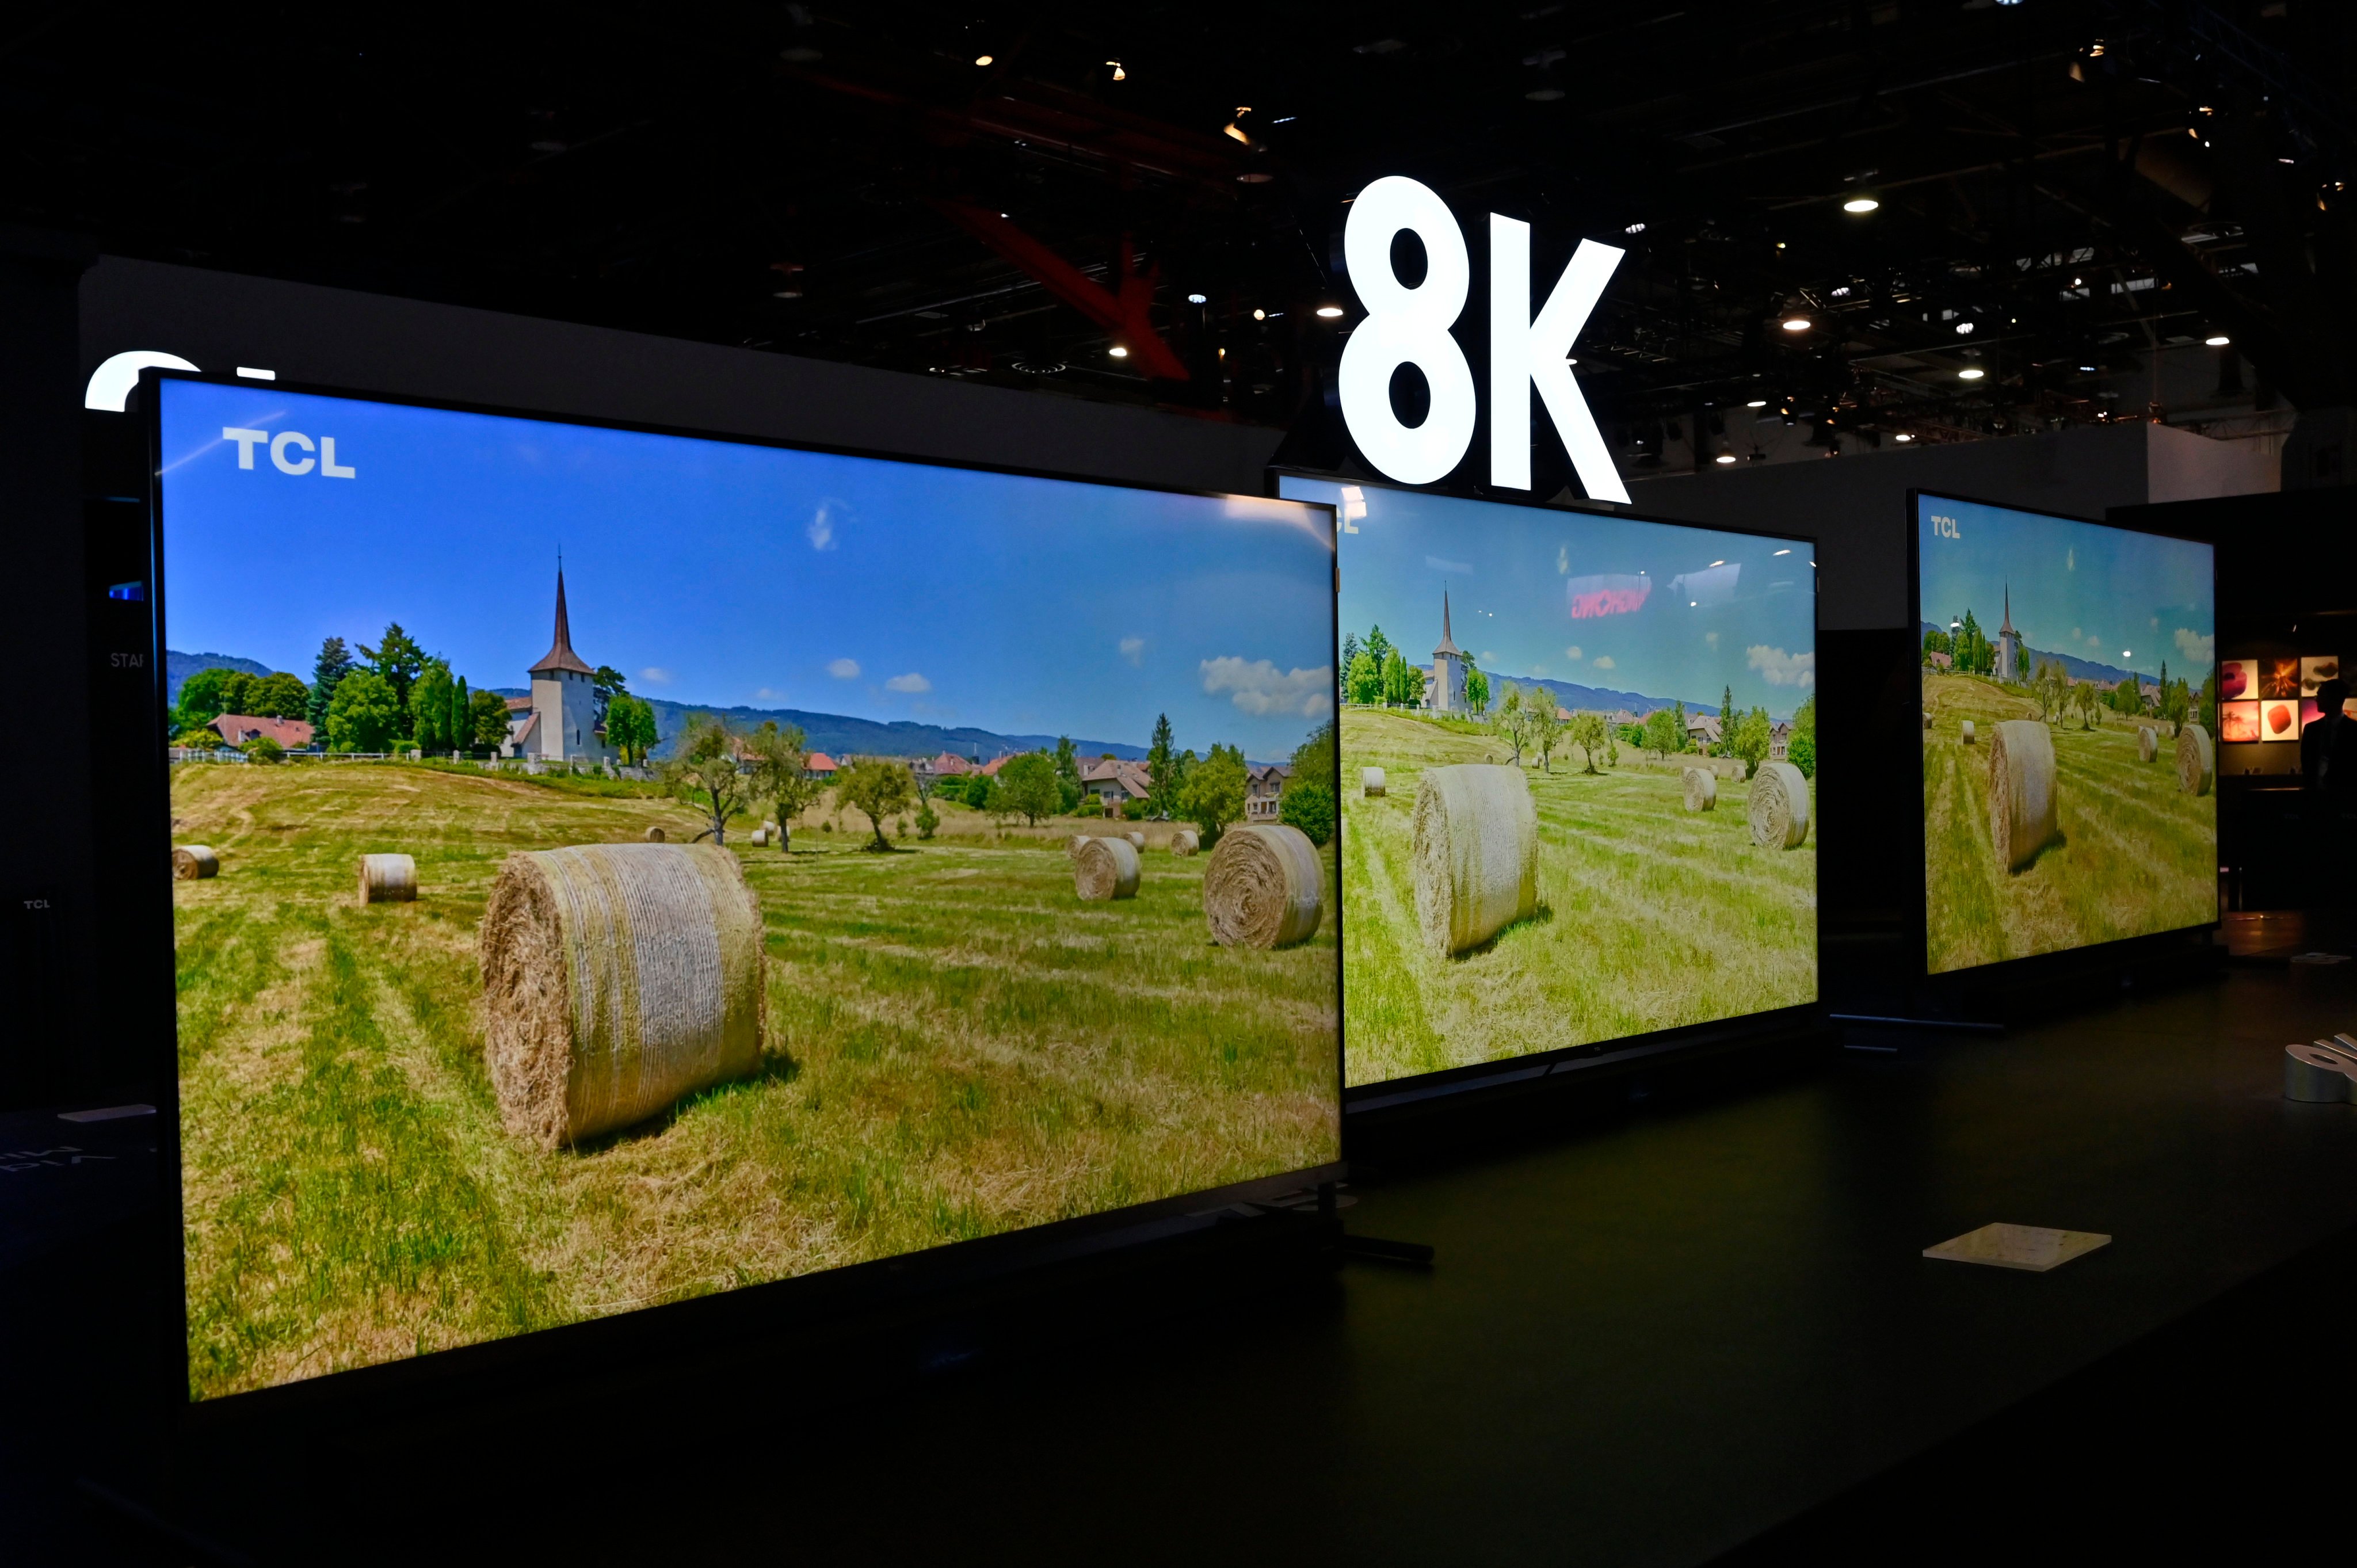 Televisions featuring 8K technology are displayed at the TCL booth during CES 2020 in Las Vegas. Photo: Getty Images